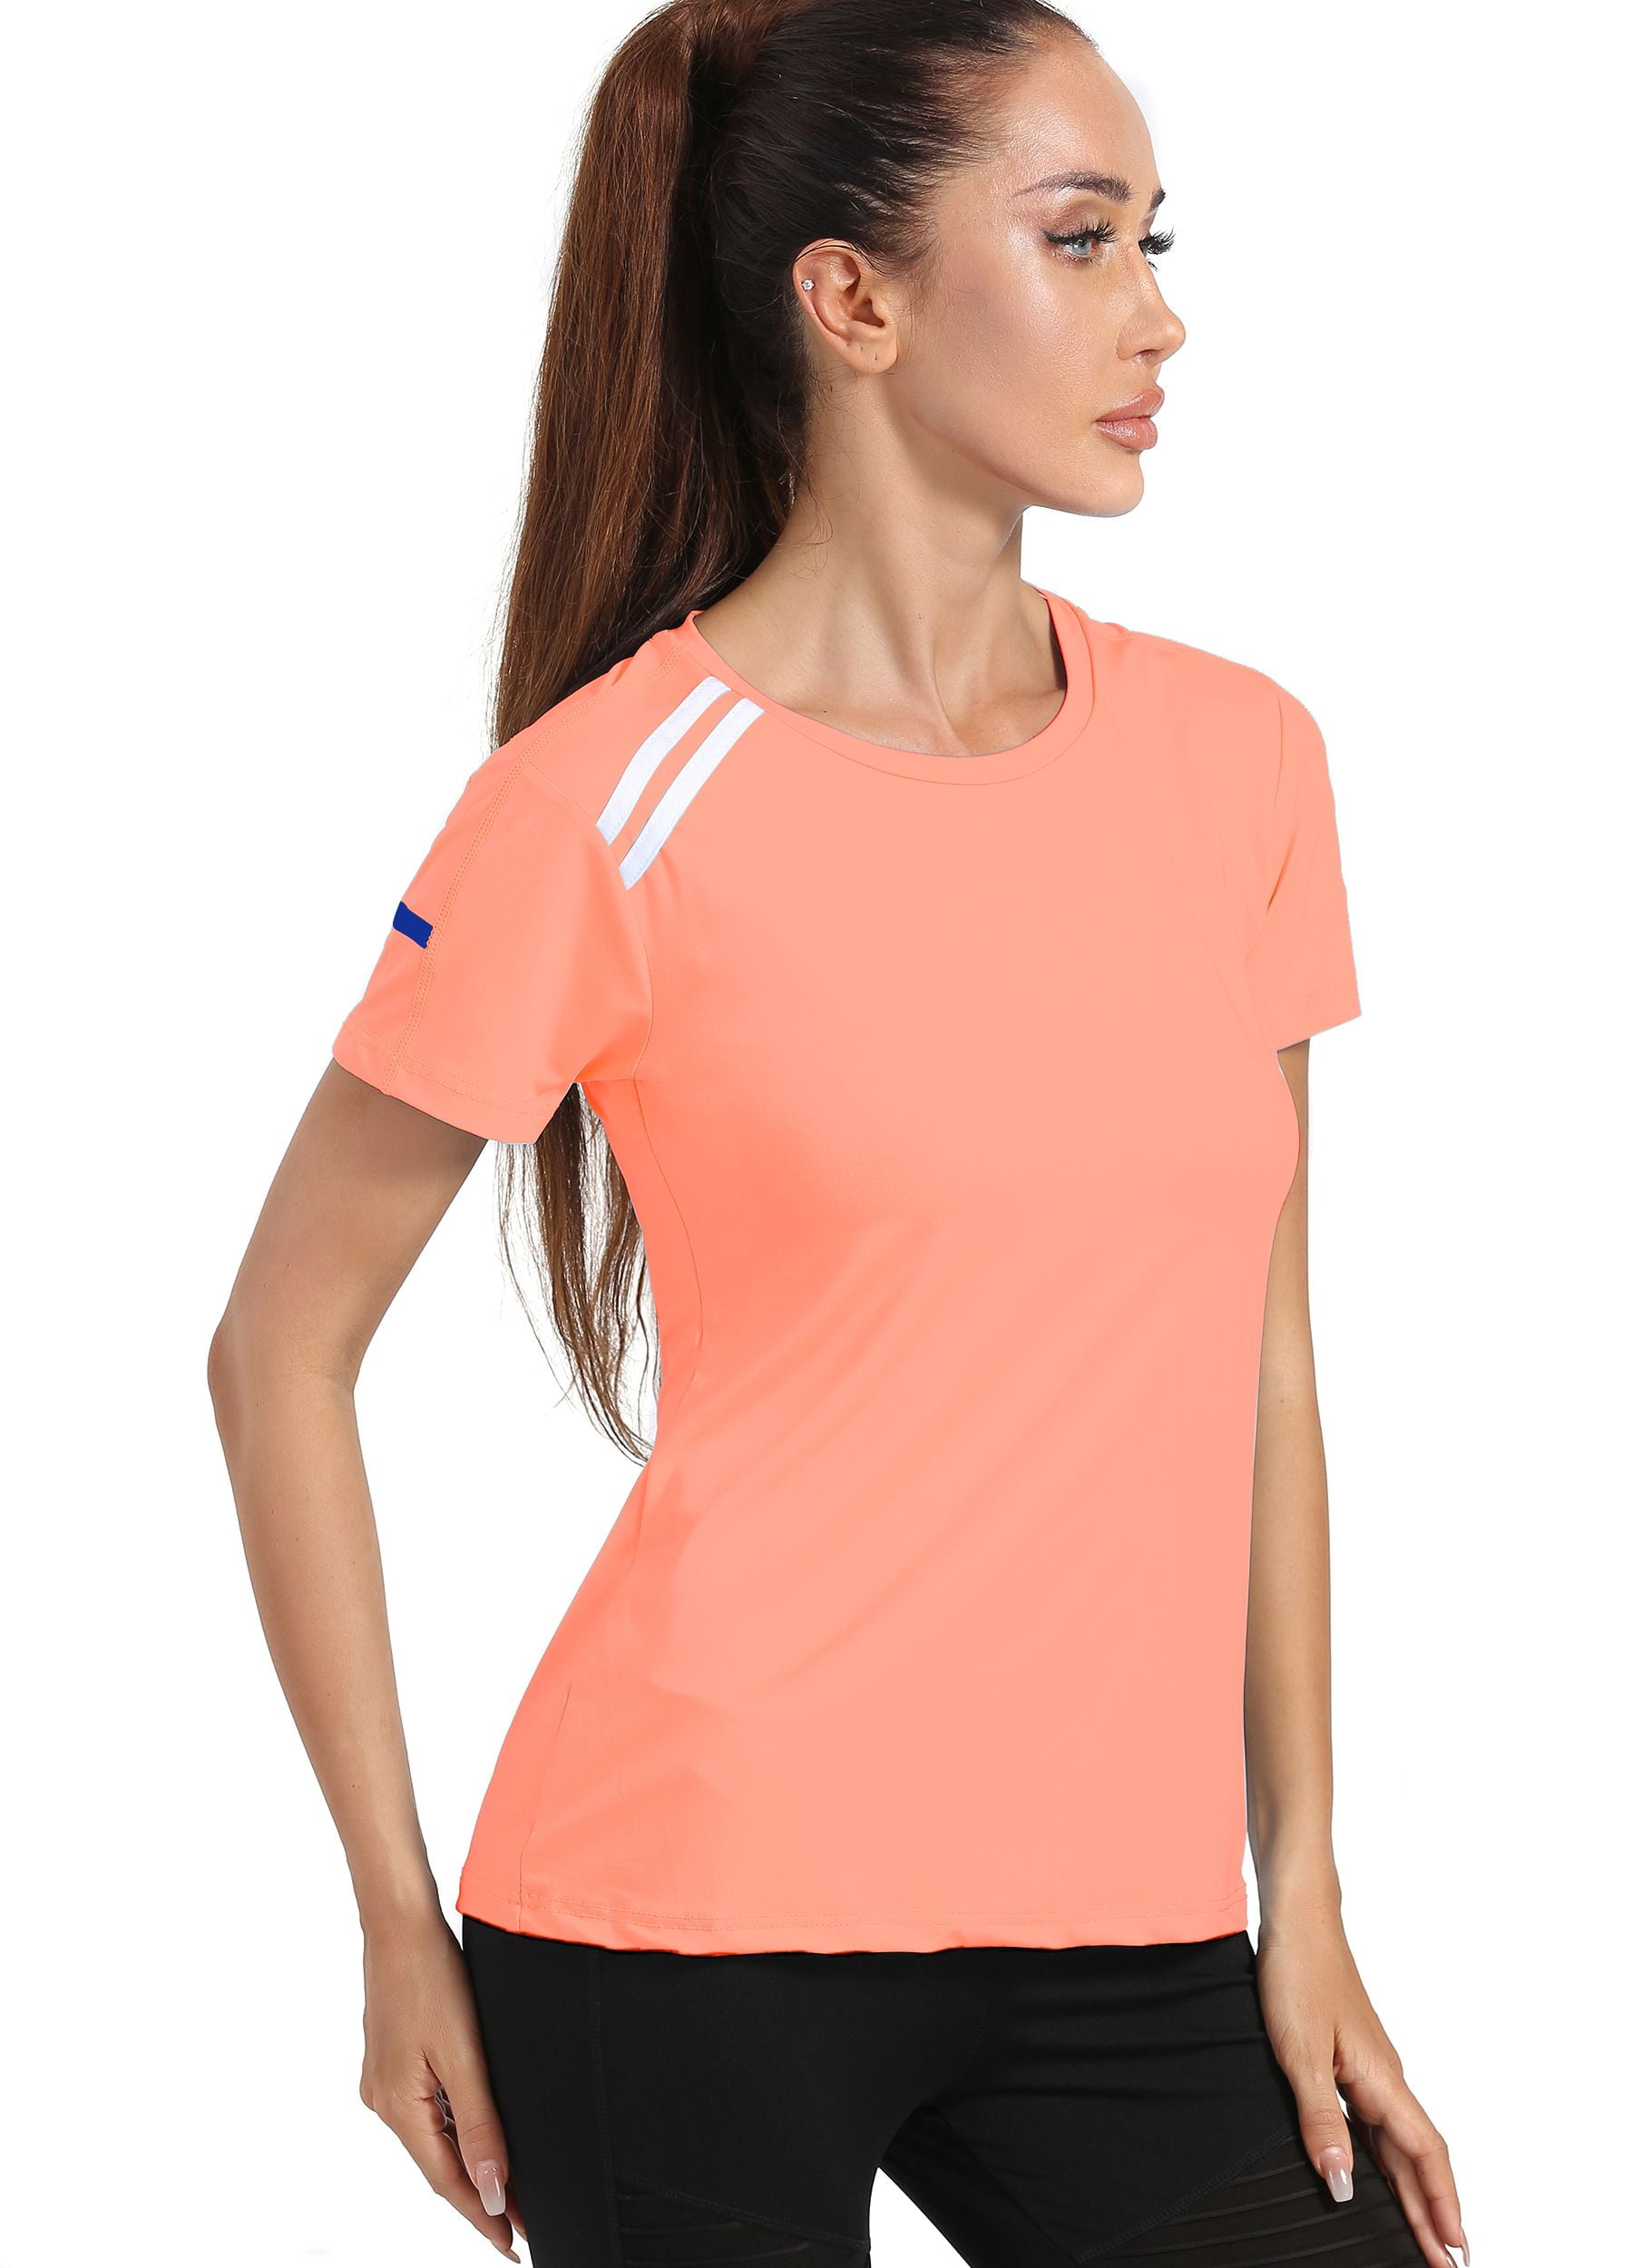 4POSE Women's Short Sleeve Active T Shirt Quick Dry Athletic Yoga